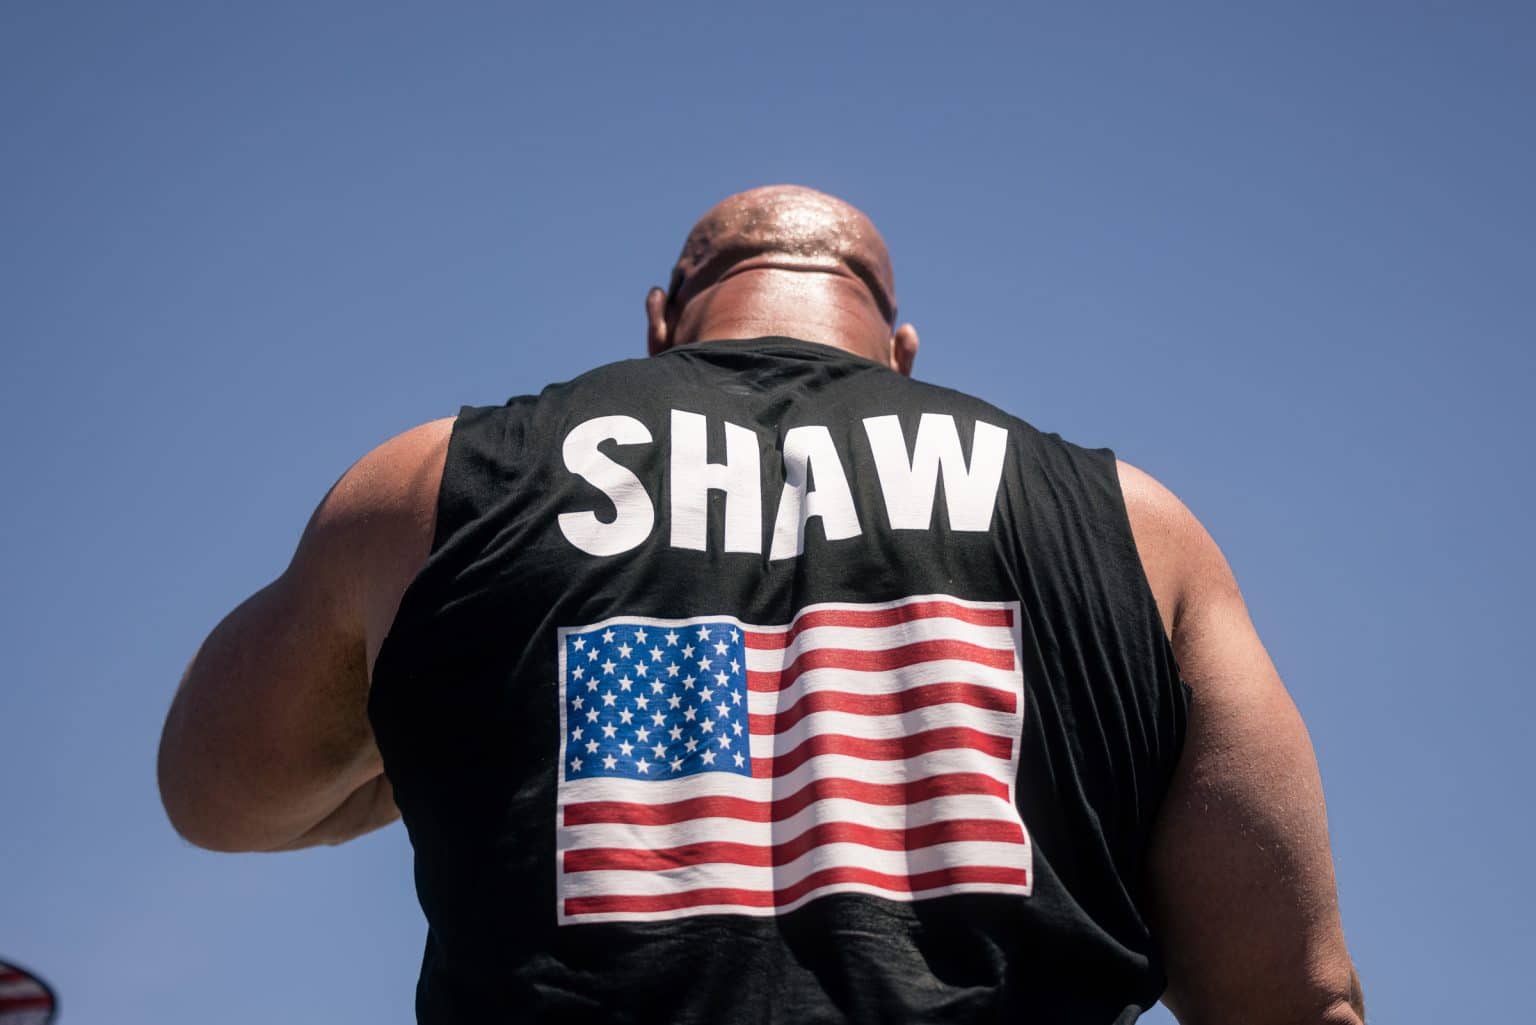 4x WSM Brian Shaw Completes His Final World’s Strongest Man Appearance